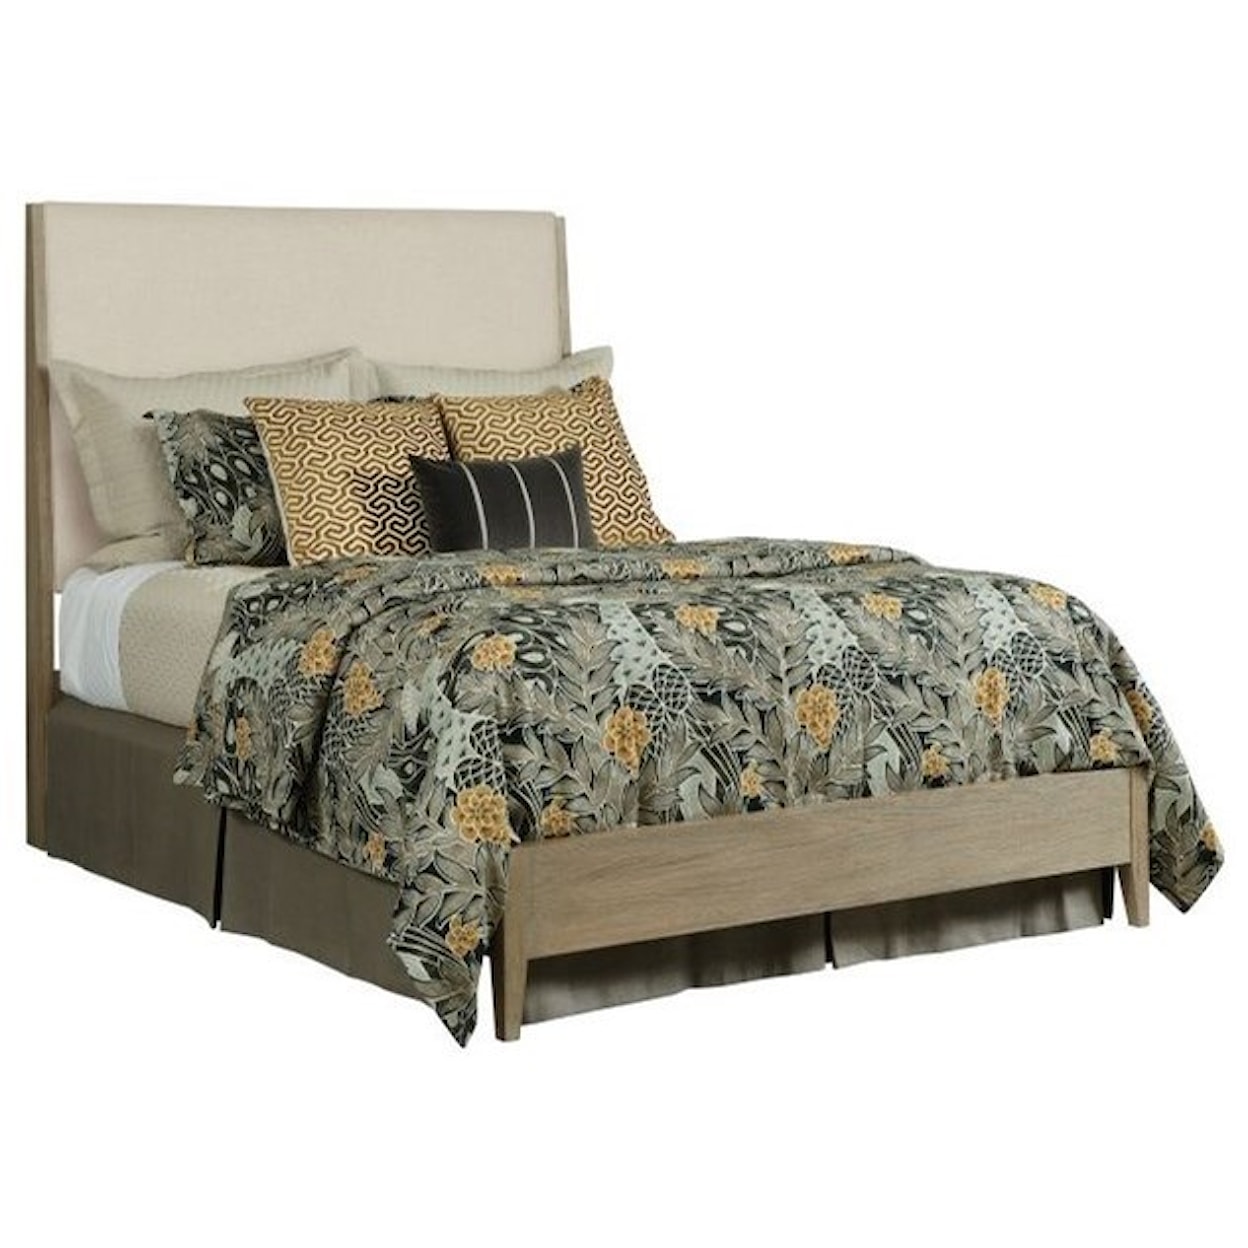 Kincaid Furniture Symmetry Incline Queen Upholstered Bed